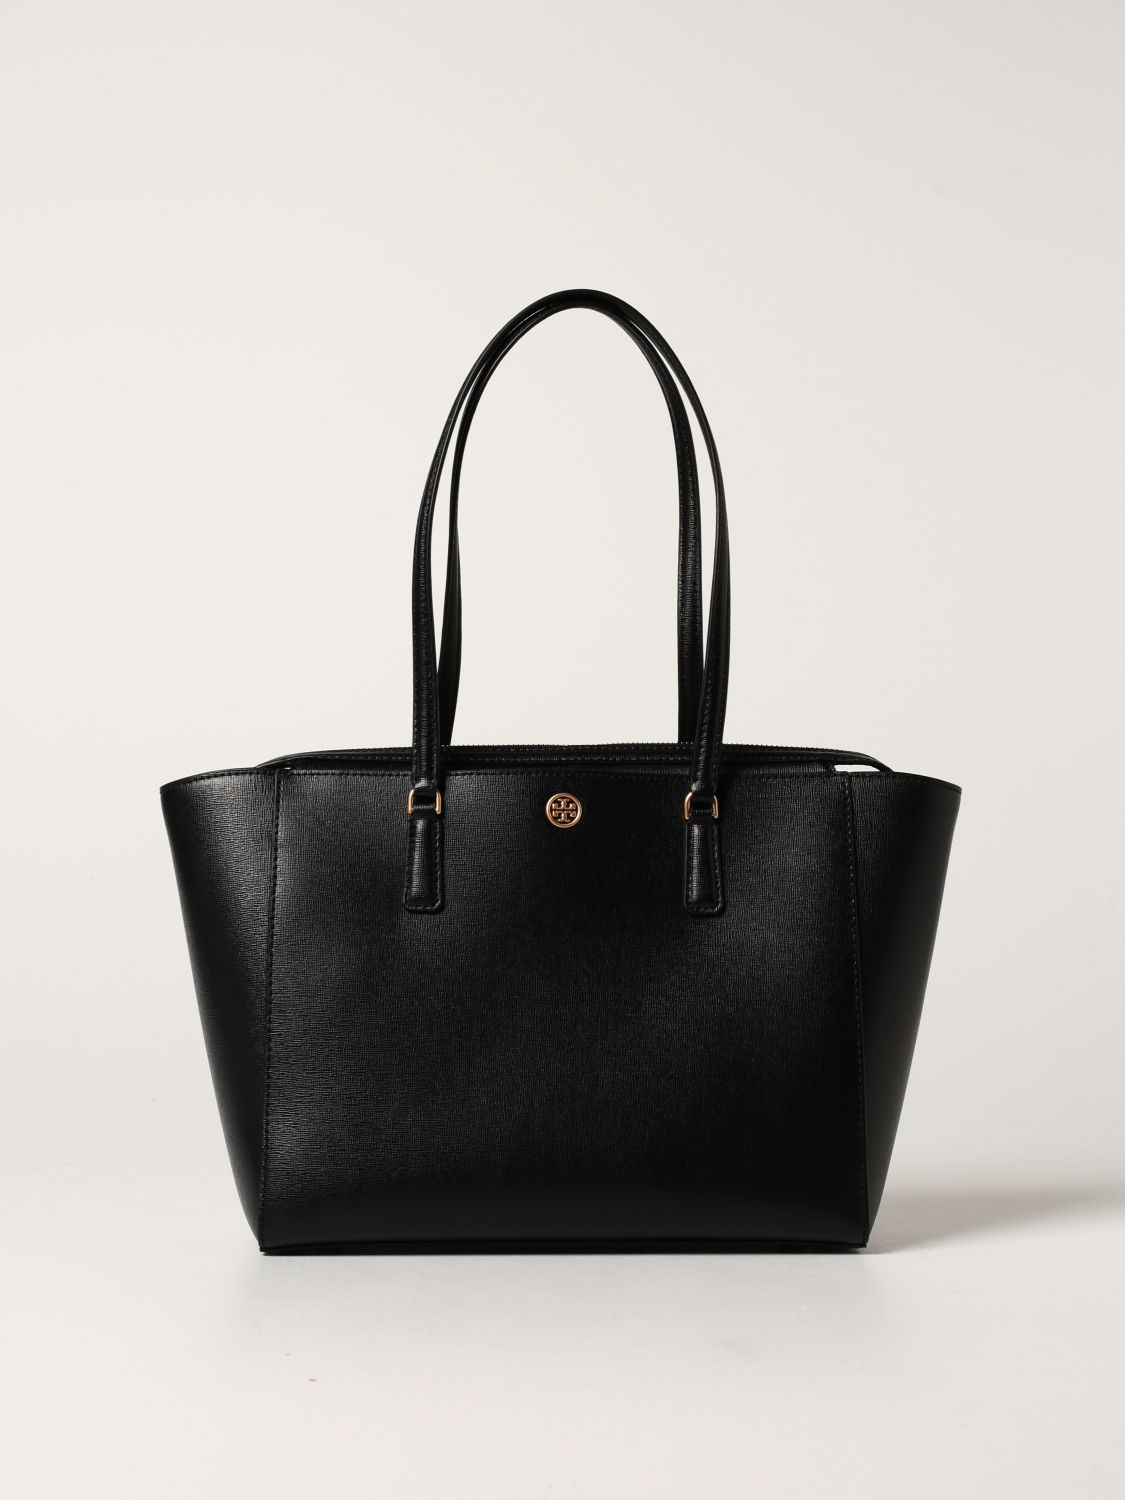 TORY BURCH: Robinson bag in saffiano leather - Black | Tory Burch tote bags  83078 online on 